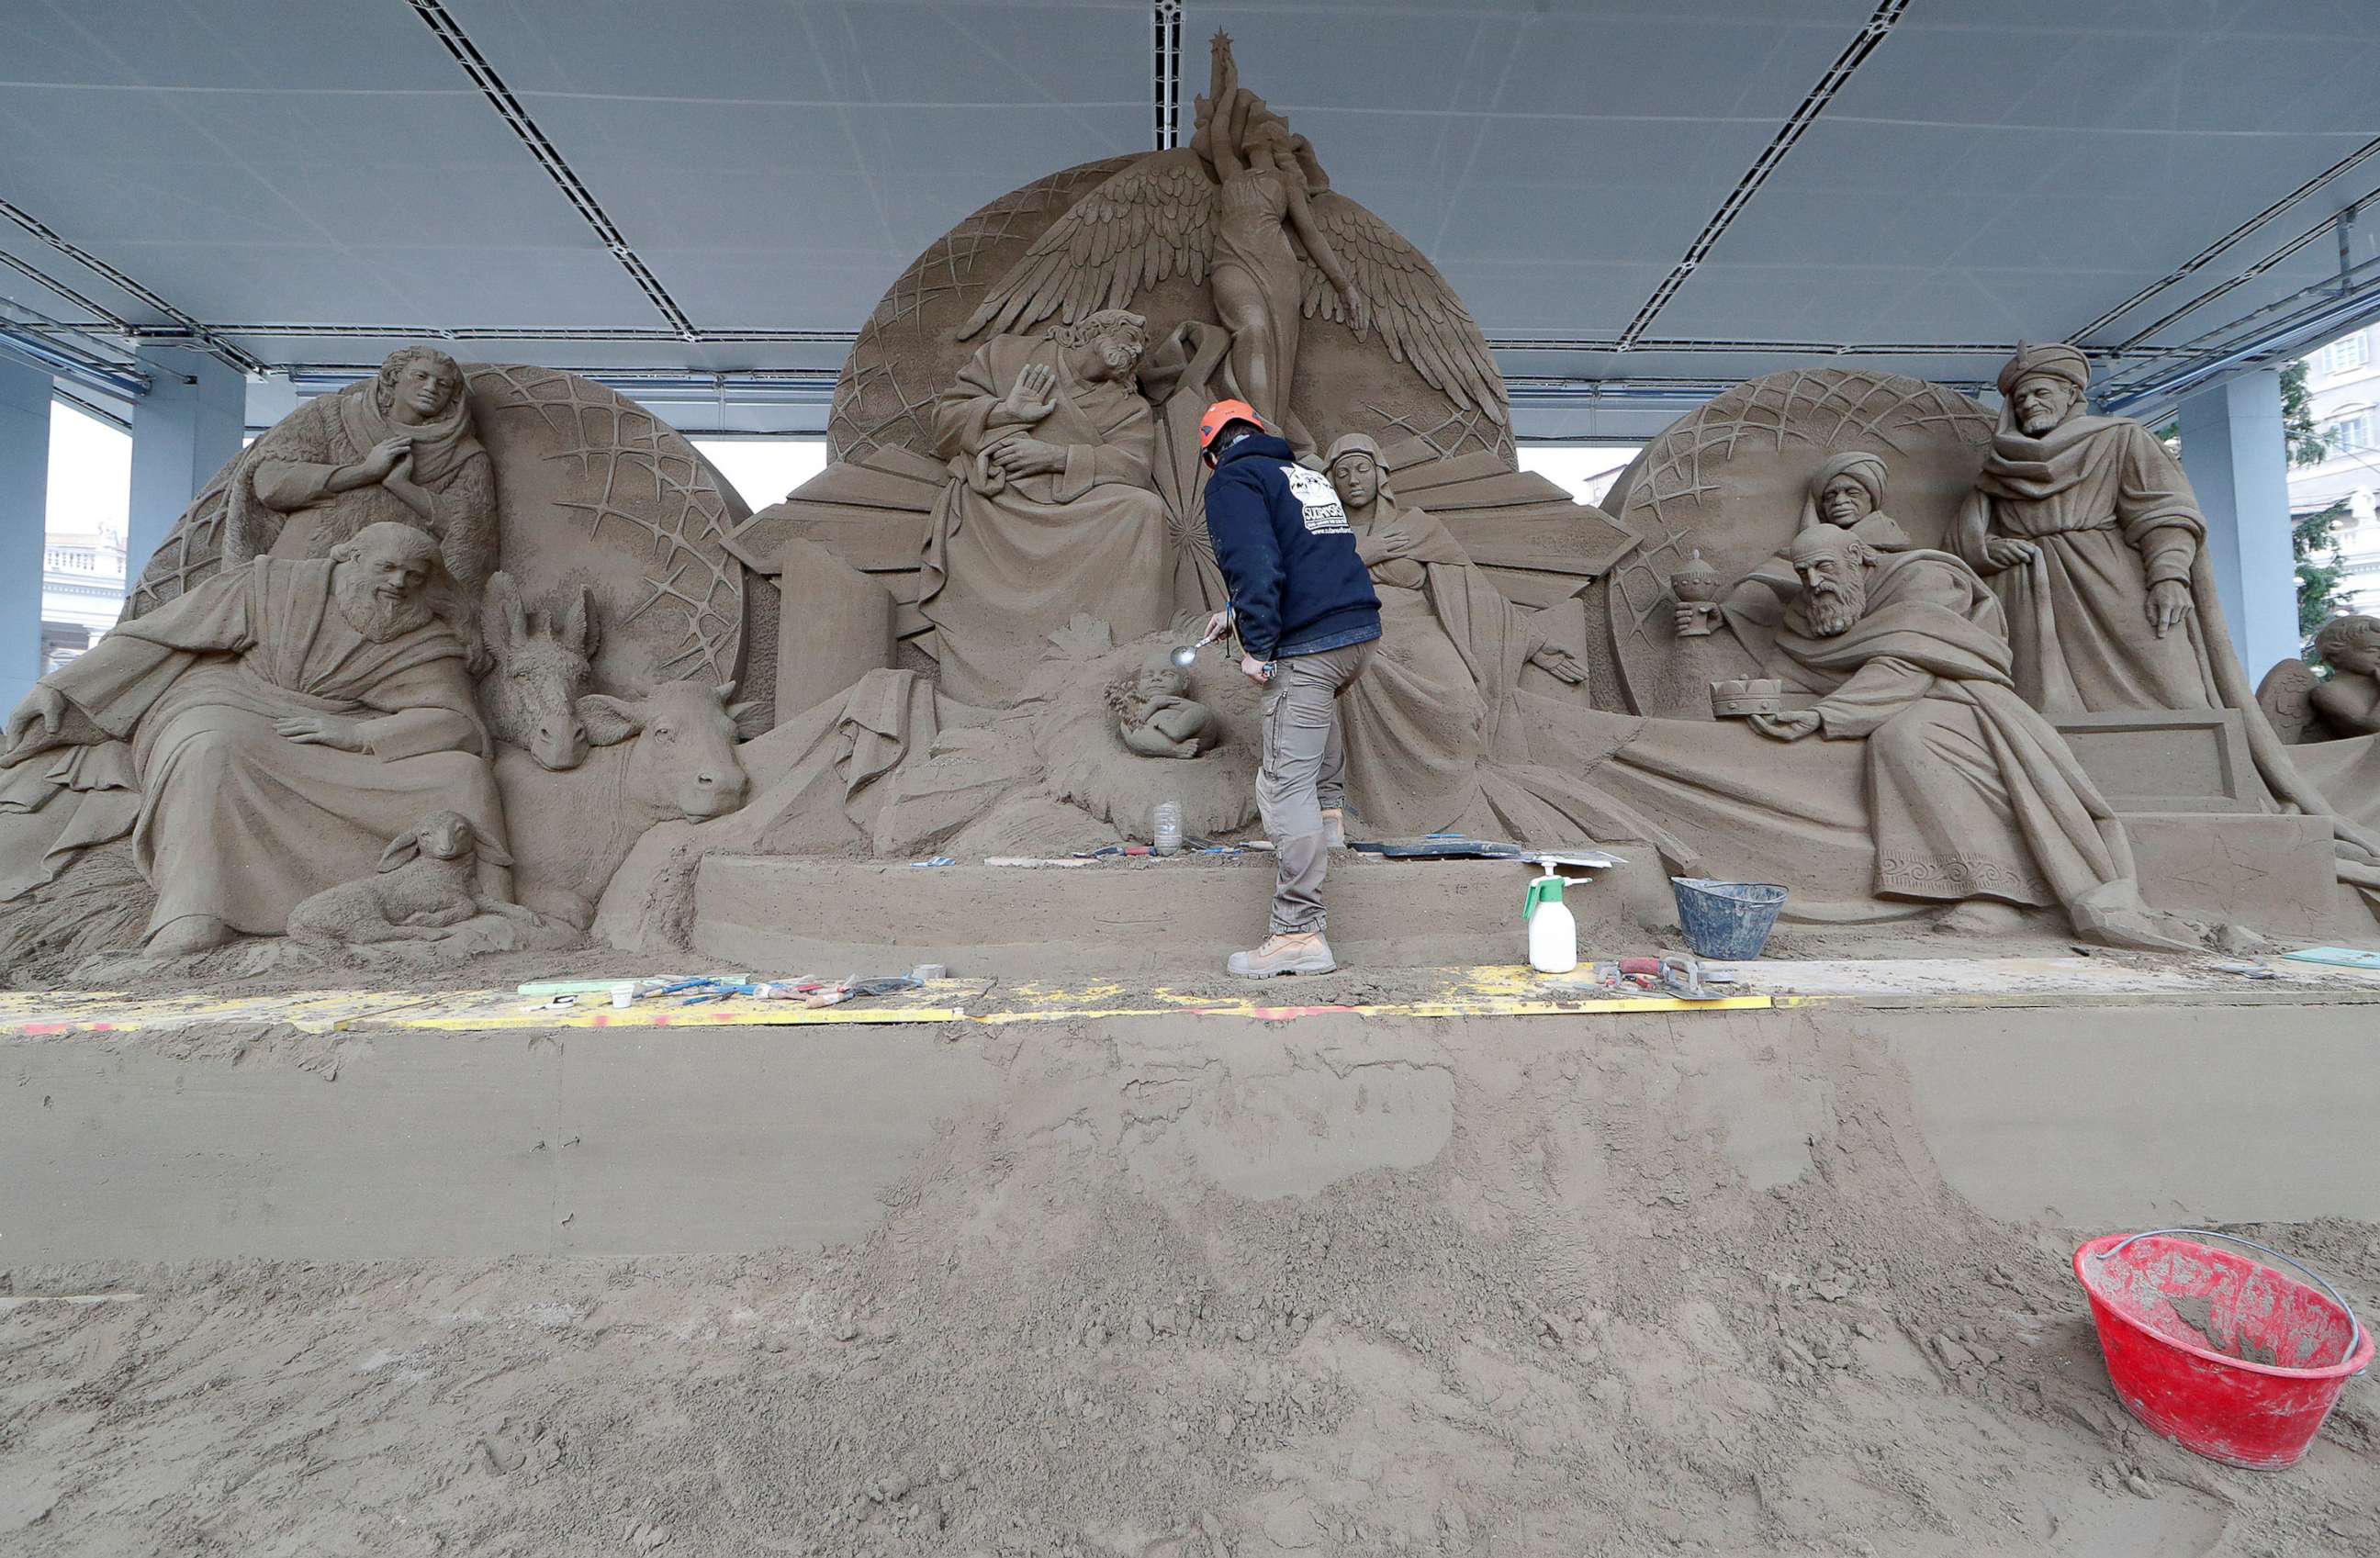 PHOTO: An artist works on a sand sculpture representing part of nativity scene in St. Peter's square at the Vatican, Dec. 6, 2018.